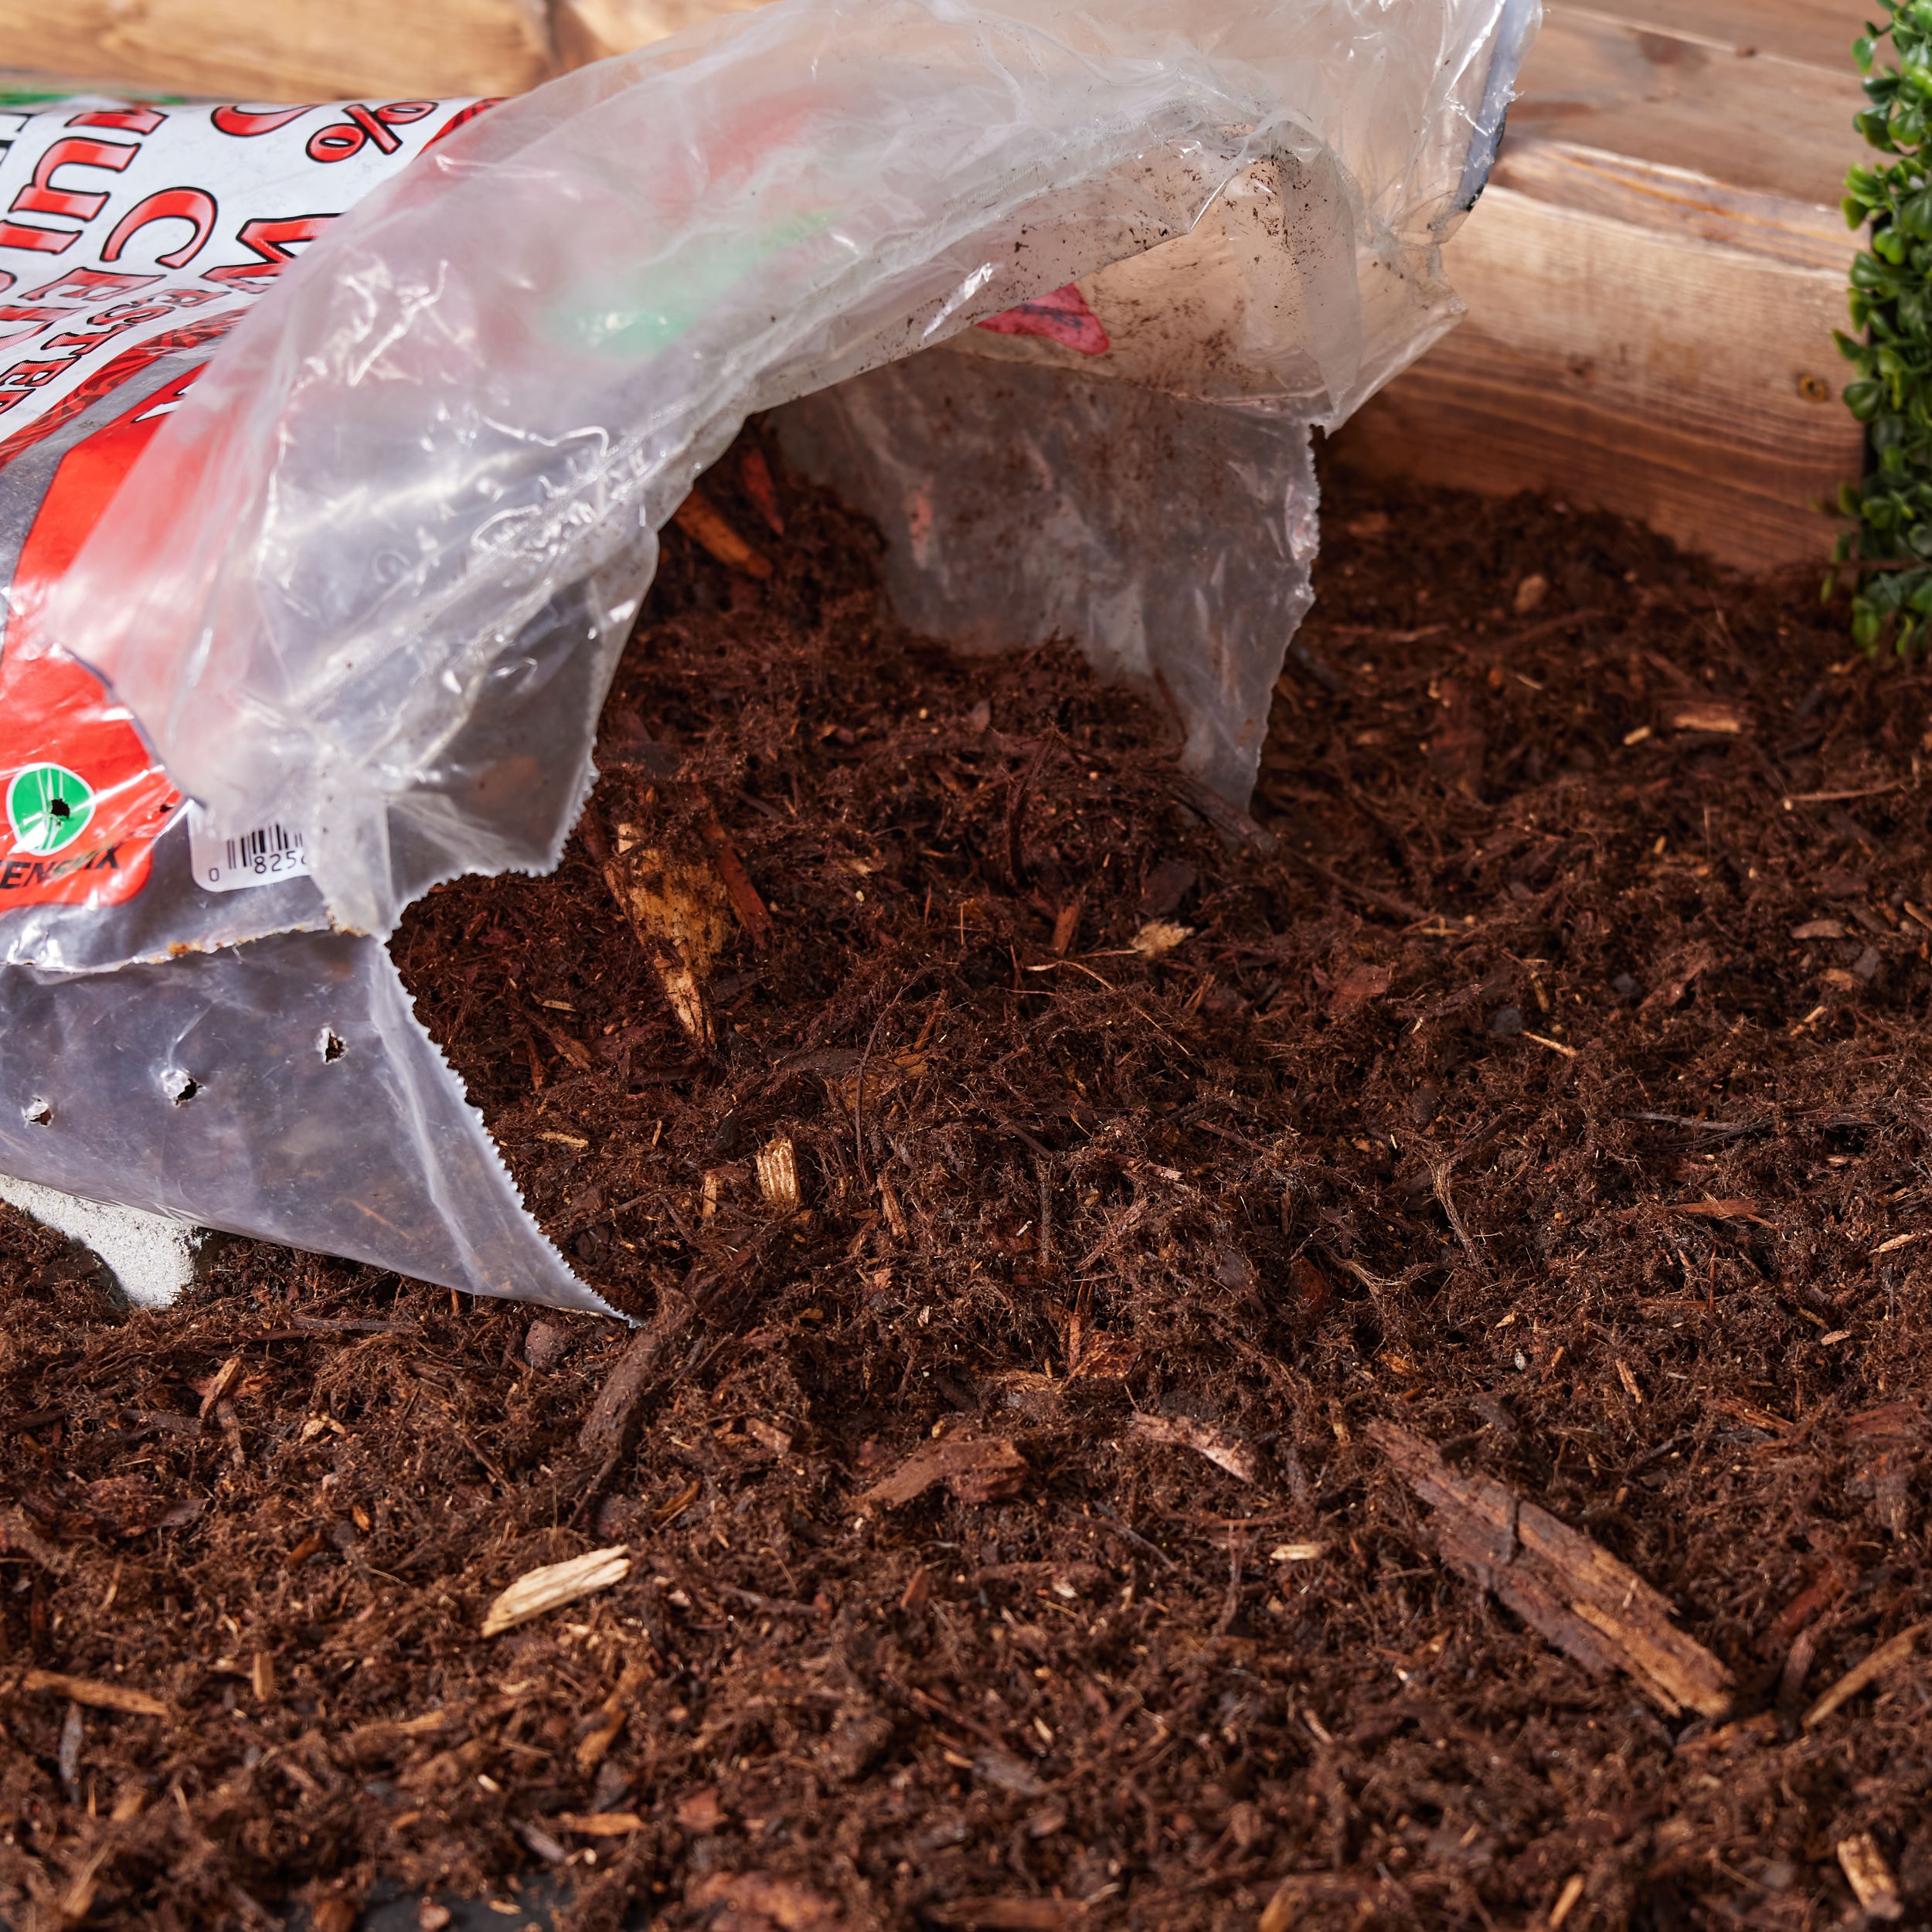 Home Depot and Lowe's July 4 Sales: Mulch Sale $2 Per Bag | Money